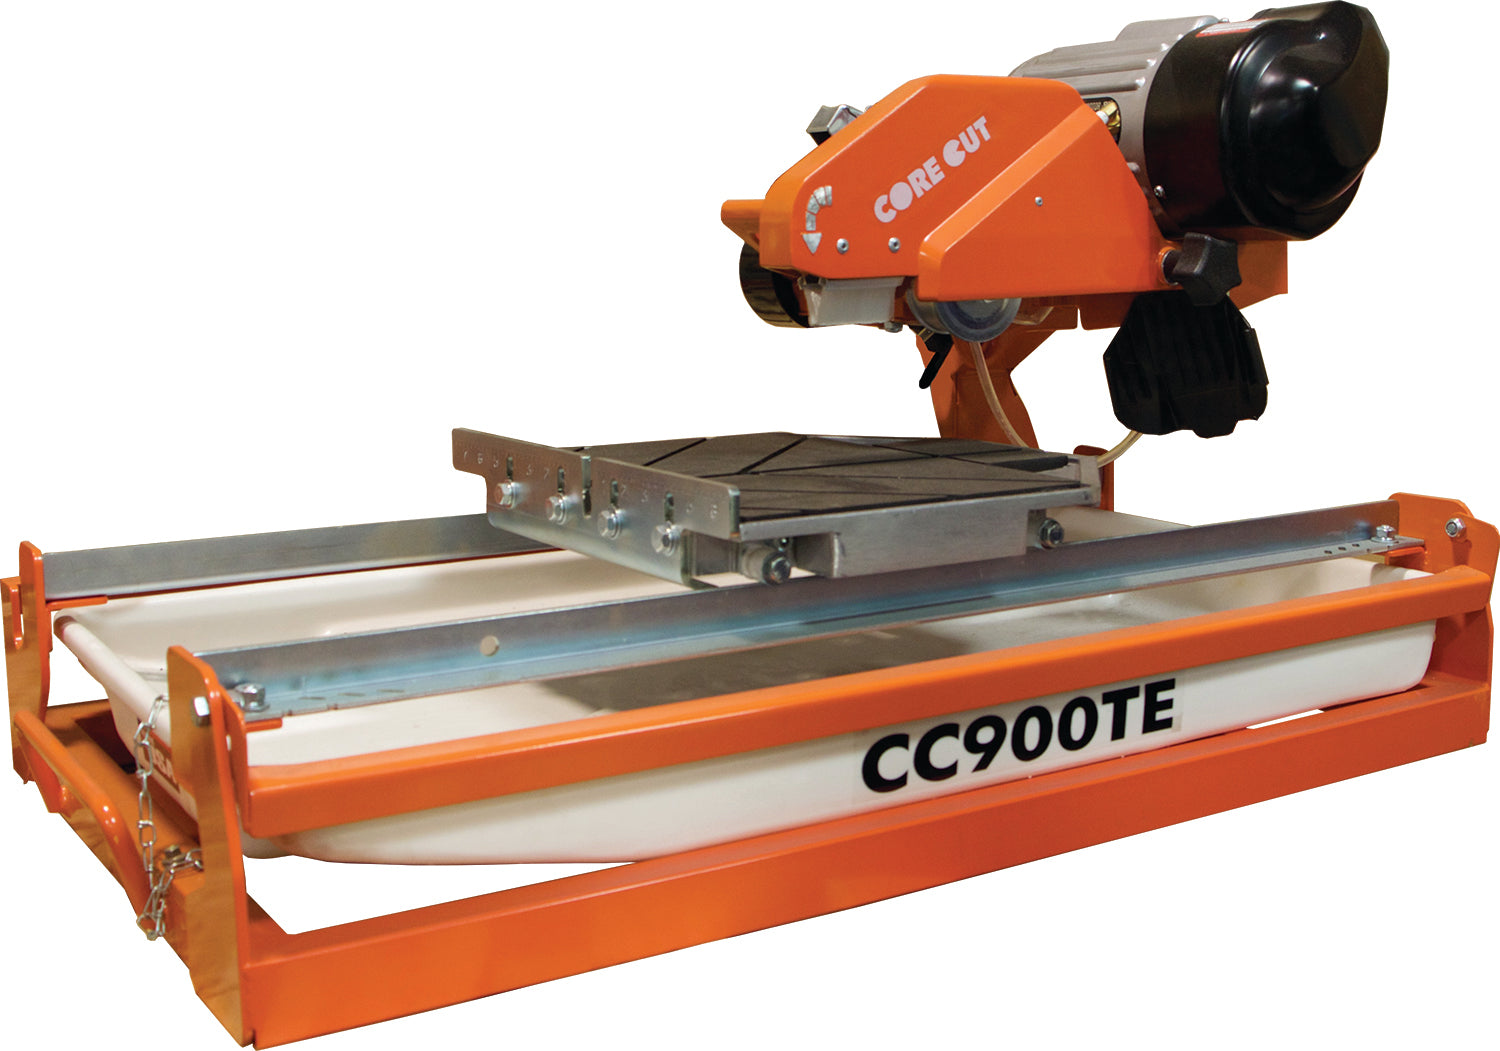 CC900TE, Electric Tile Saw with 10" Blade Capacity